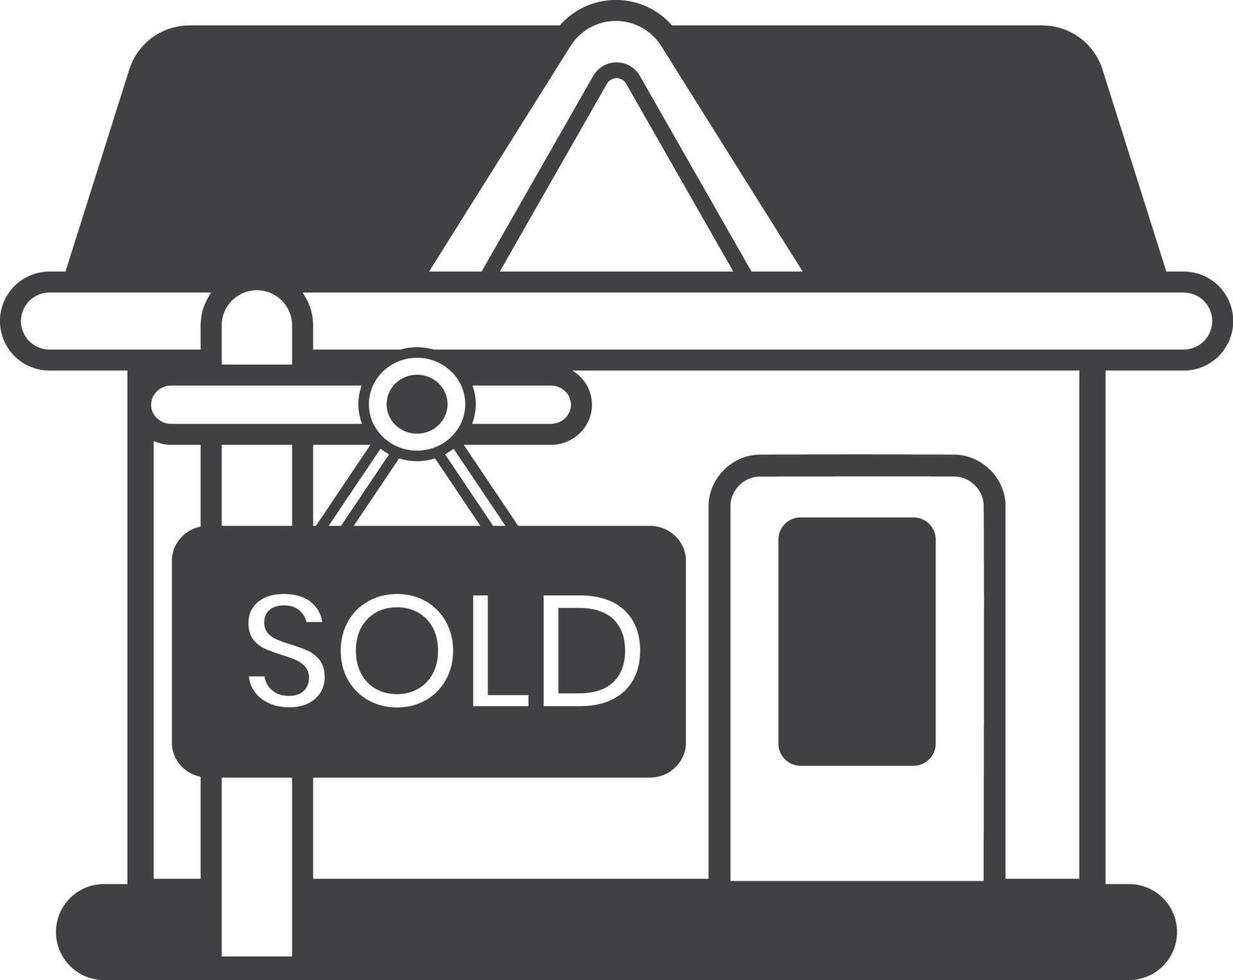 house with sold sign illustration in minimal style vector